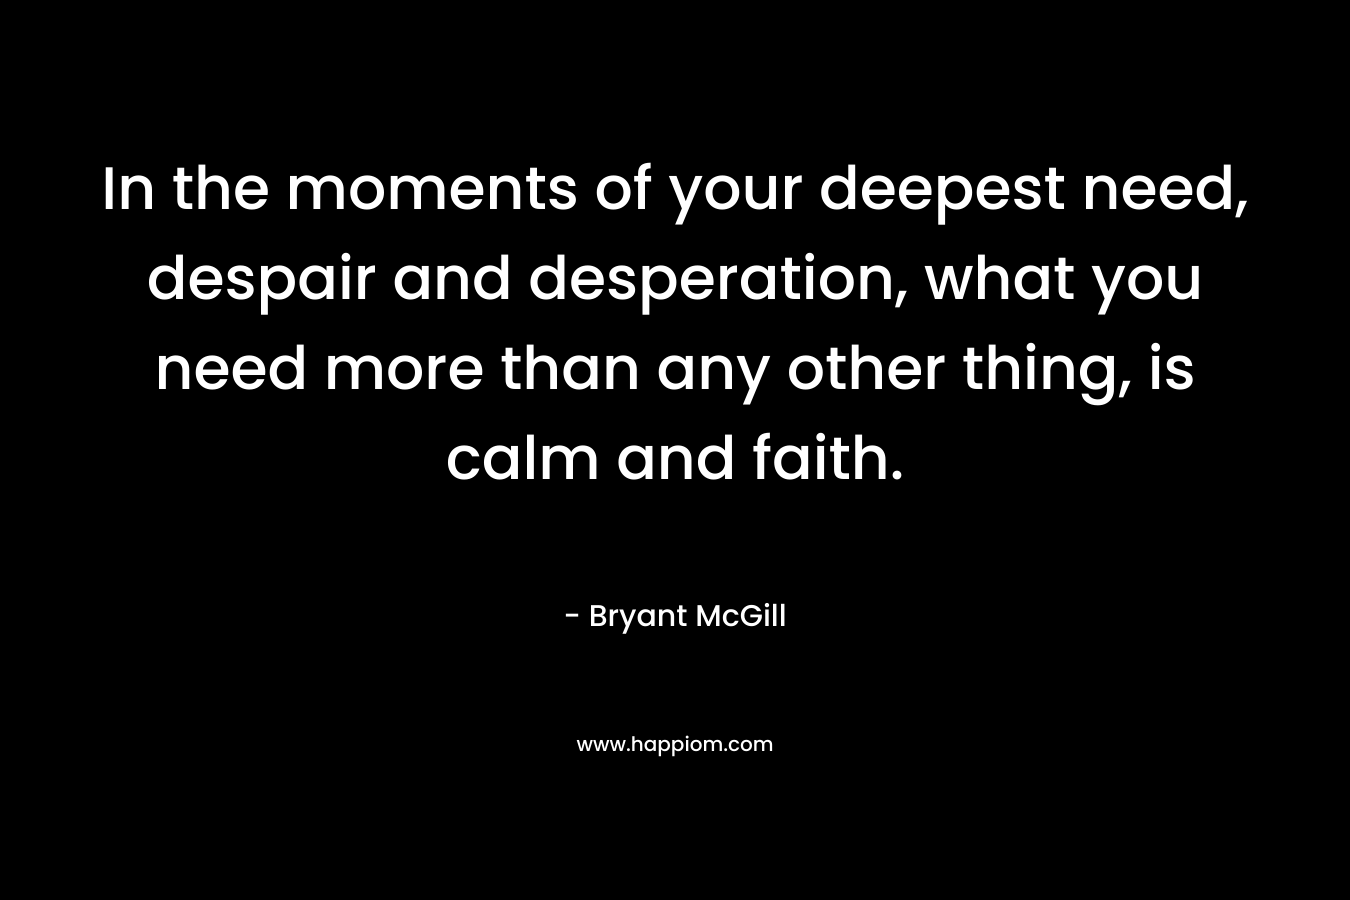 In the moments of your deepest need, despair and desperation, what you need more than any other thing, is calm and faith. – Bryant McGill